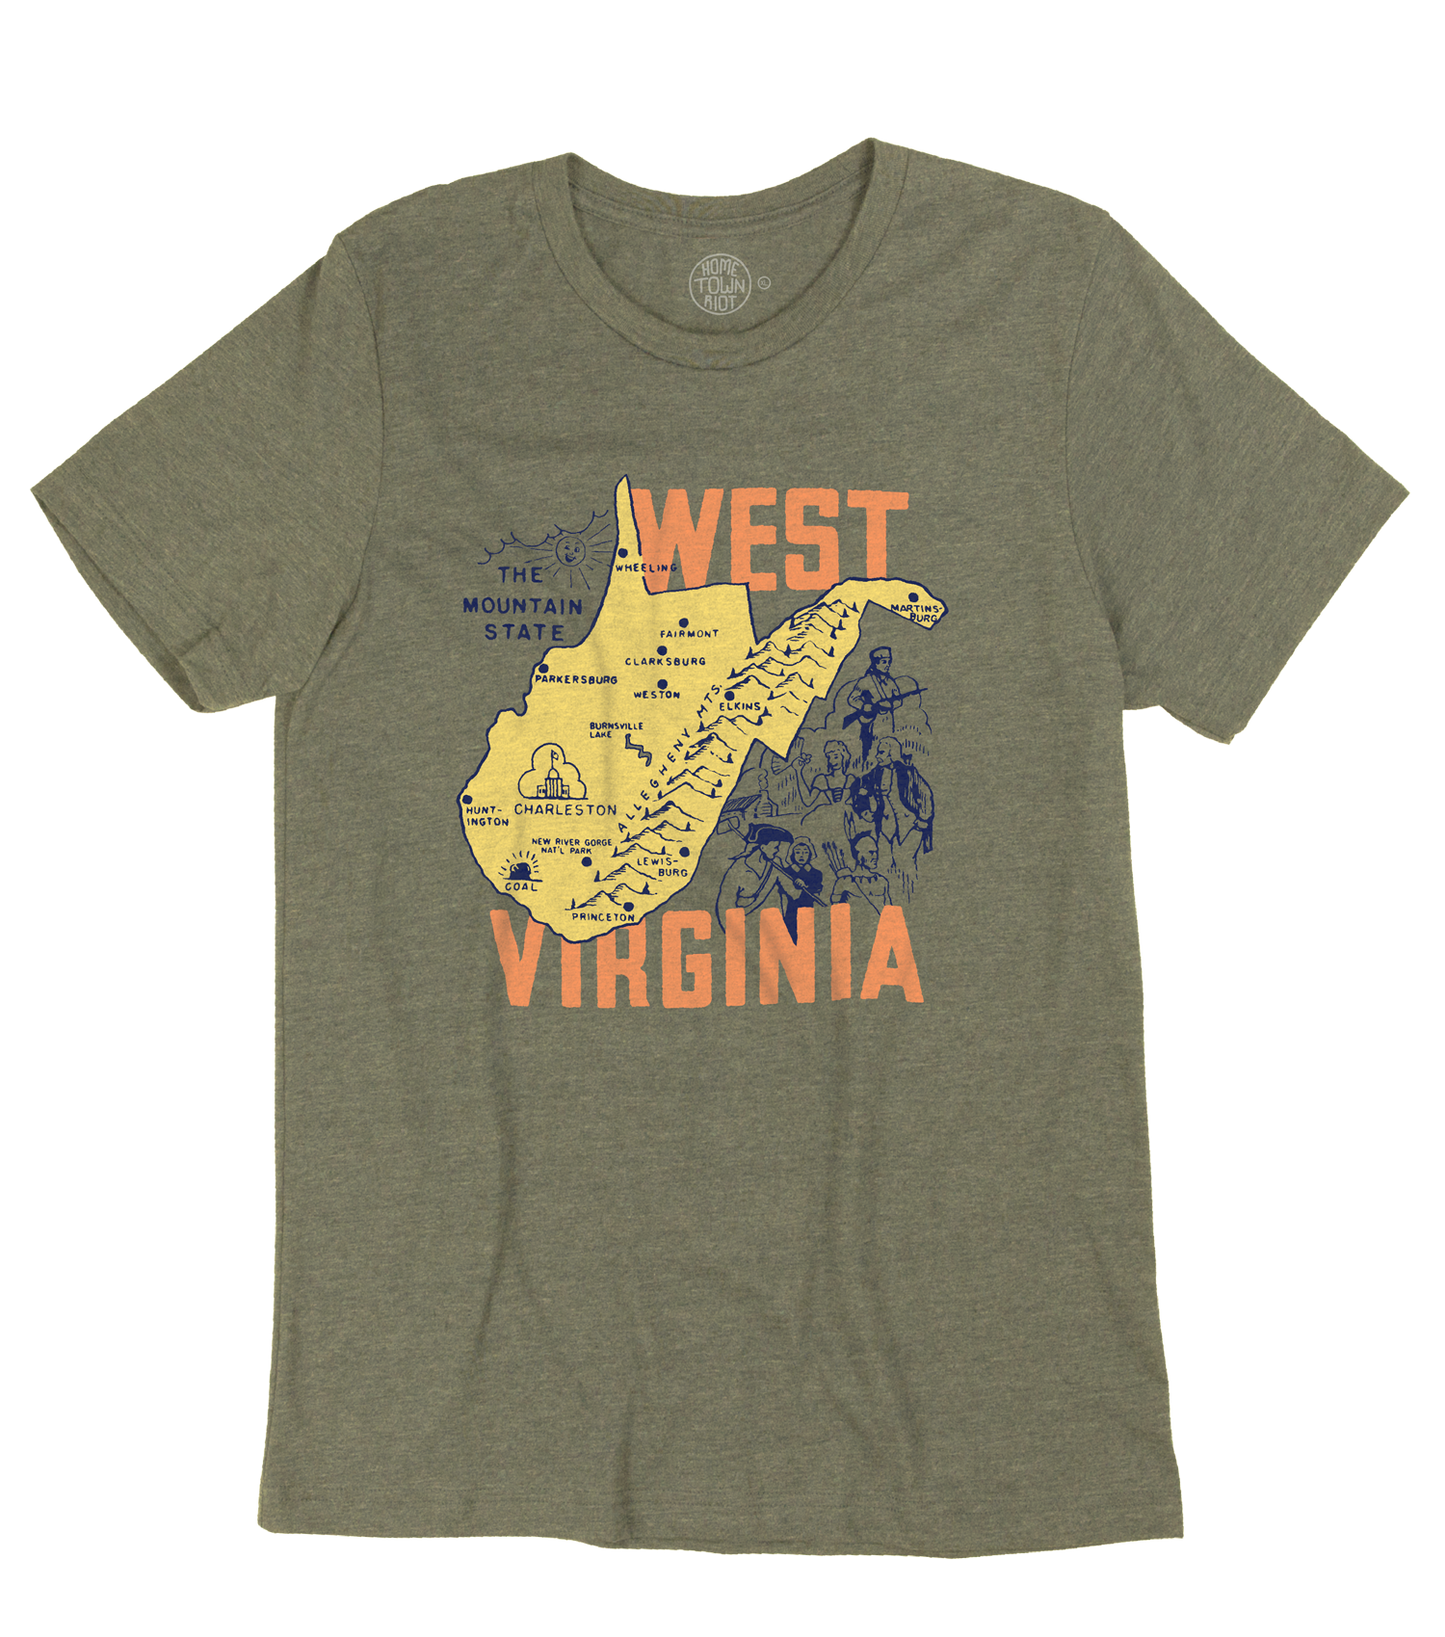 West Virginia the Mountain State Shirt - HomeTownRiot